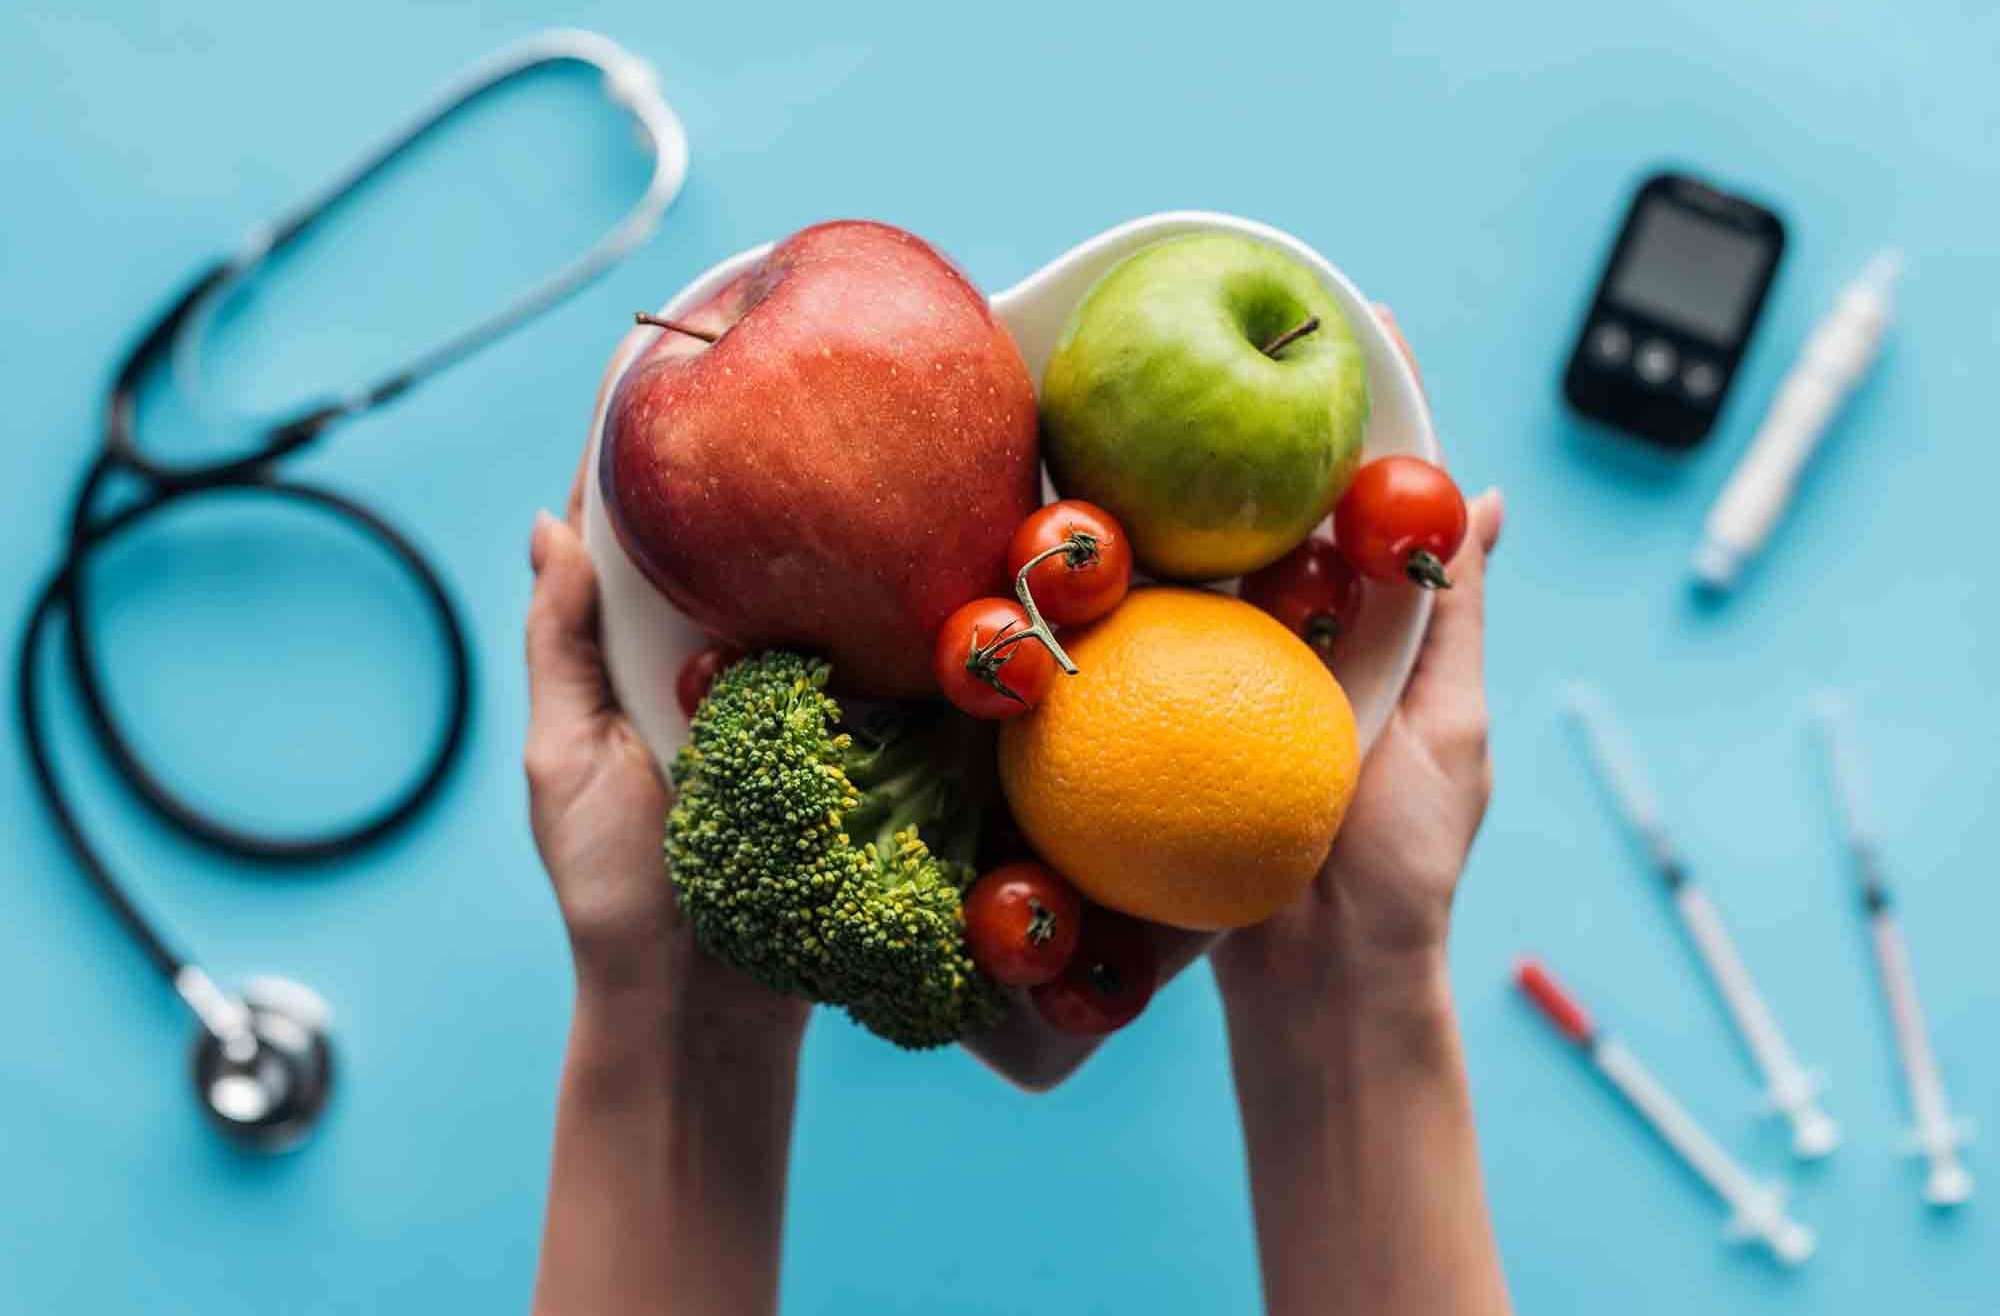 fruits-and-vegetables-in-female-hands-with-medical-equipment-on-blue-background diabetes